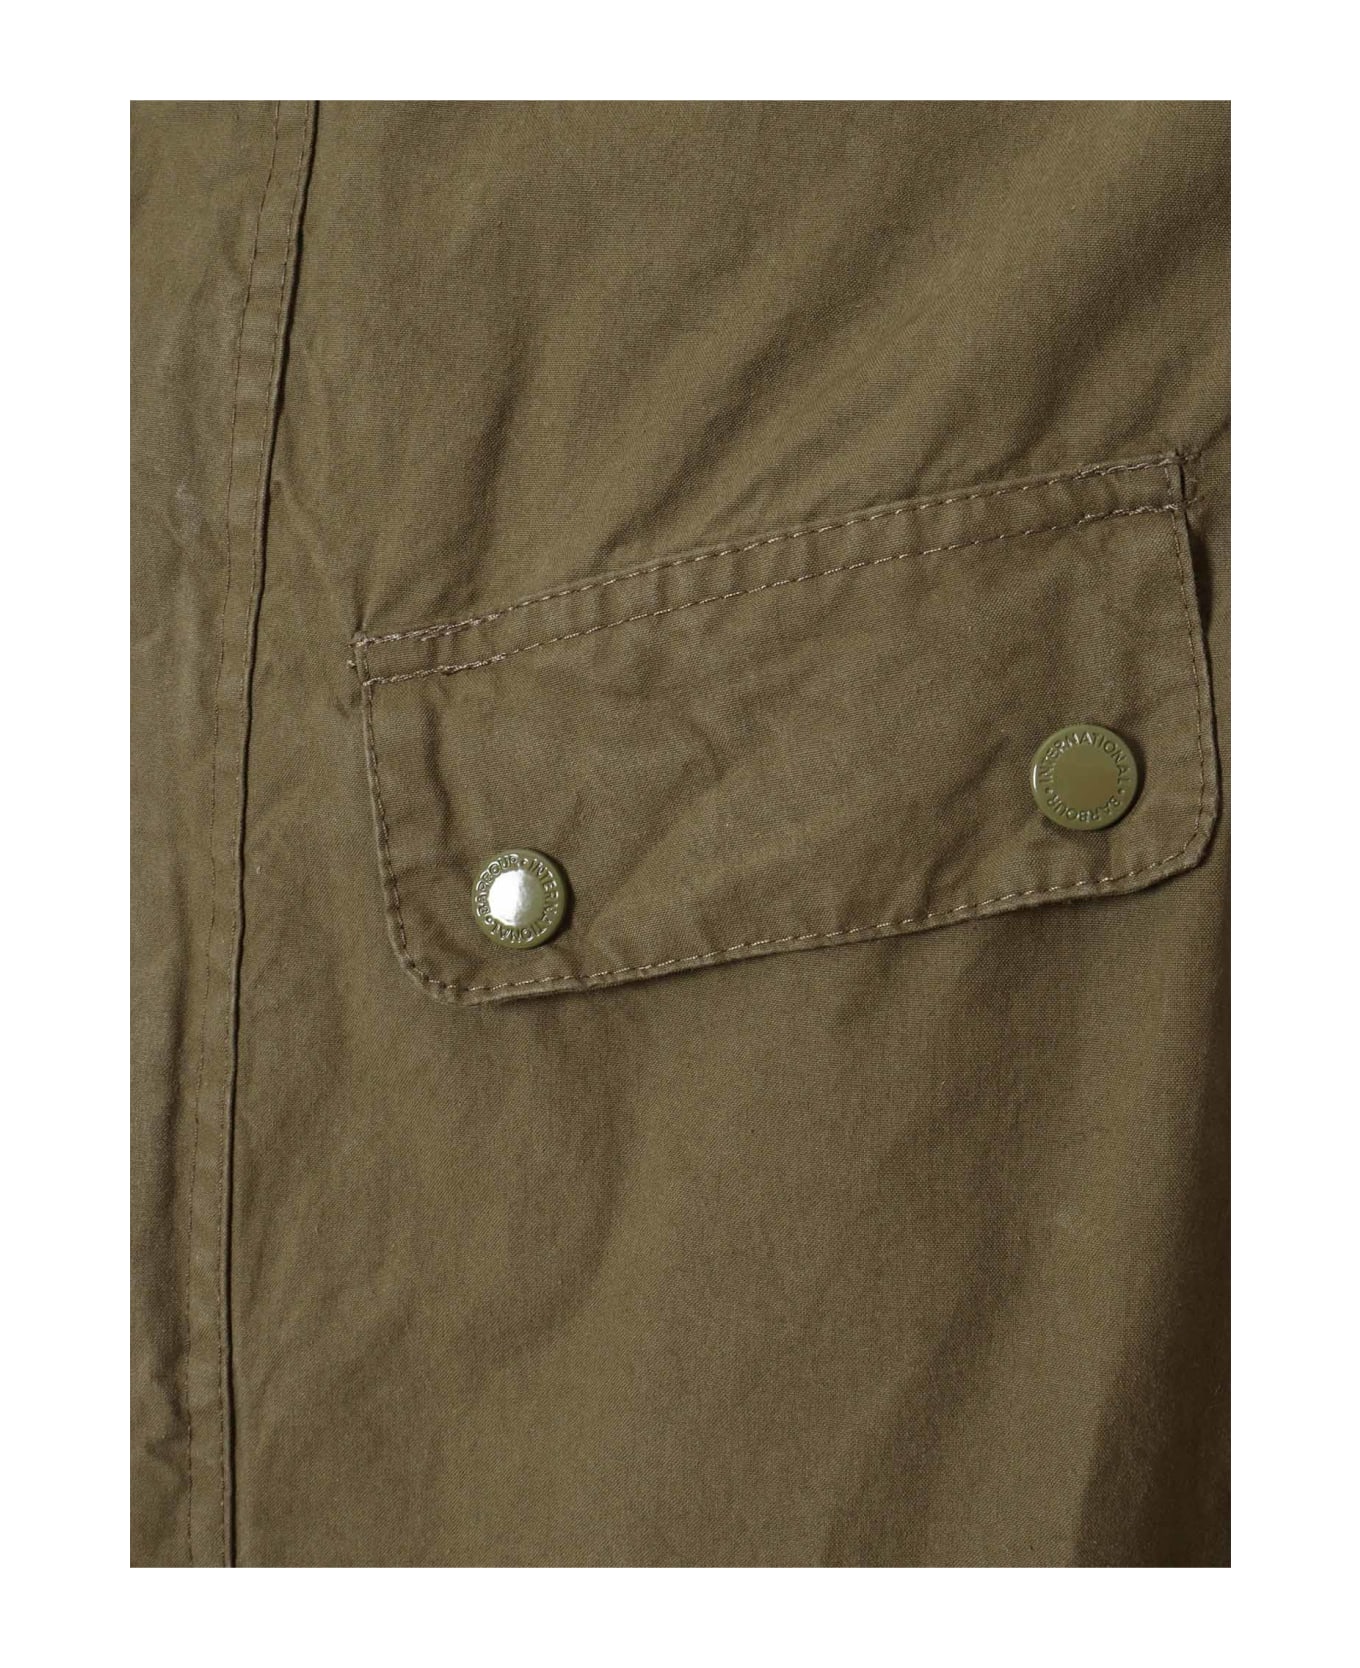 Barbour Green Military Jacket - GREEN